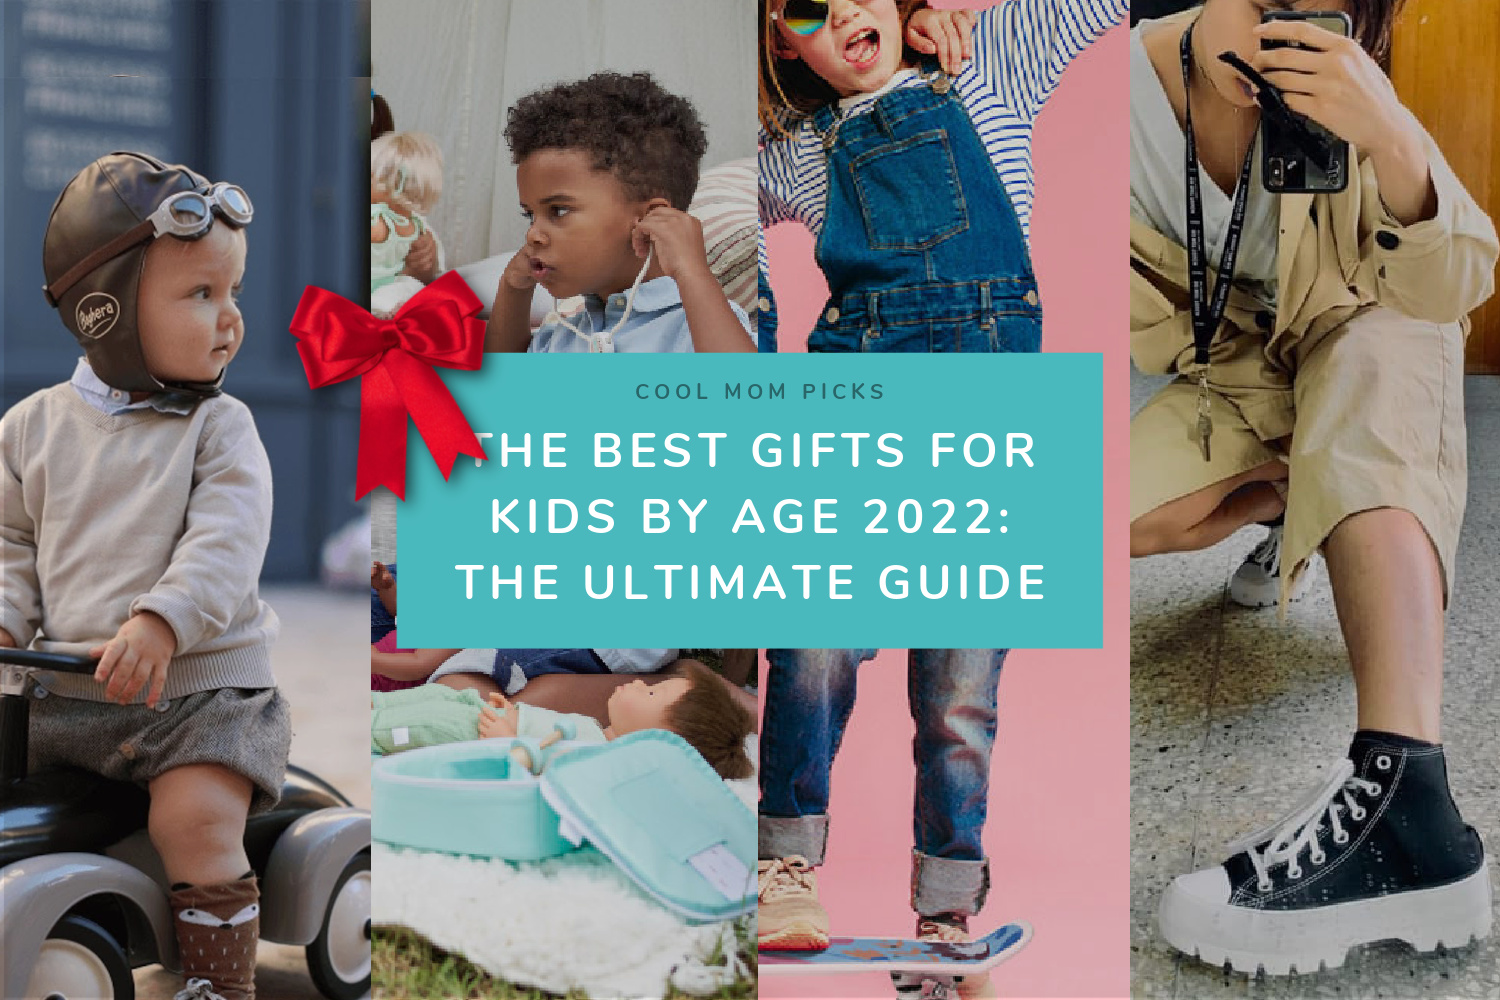 2022 Best gifts for kids : The ultimate guide with 200+ creative gift ideas for kids of all ages | Cool Mom Picks